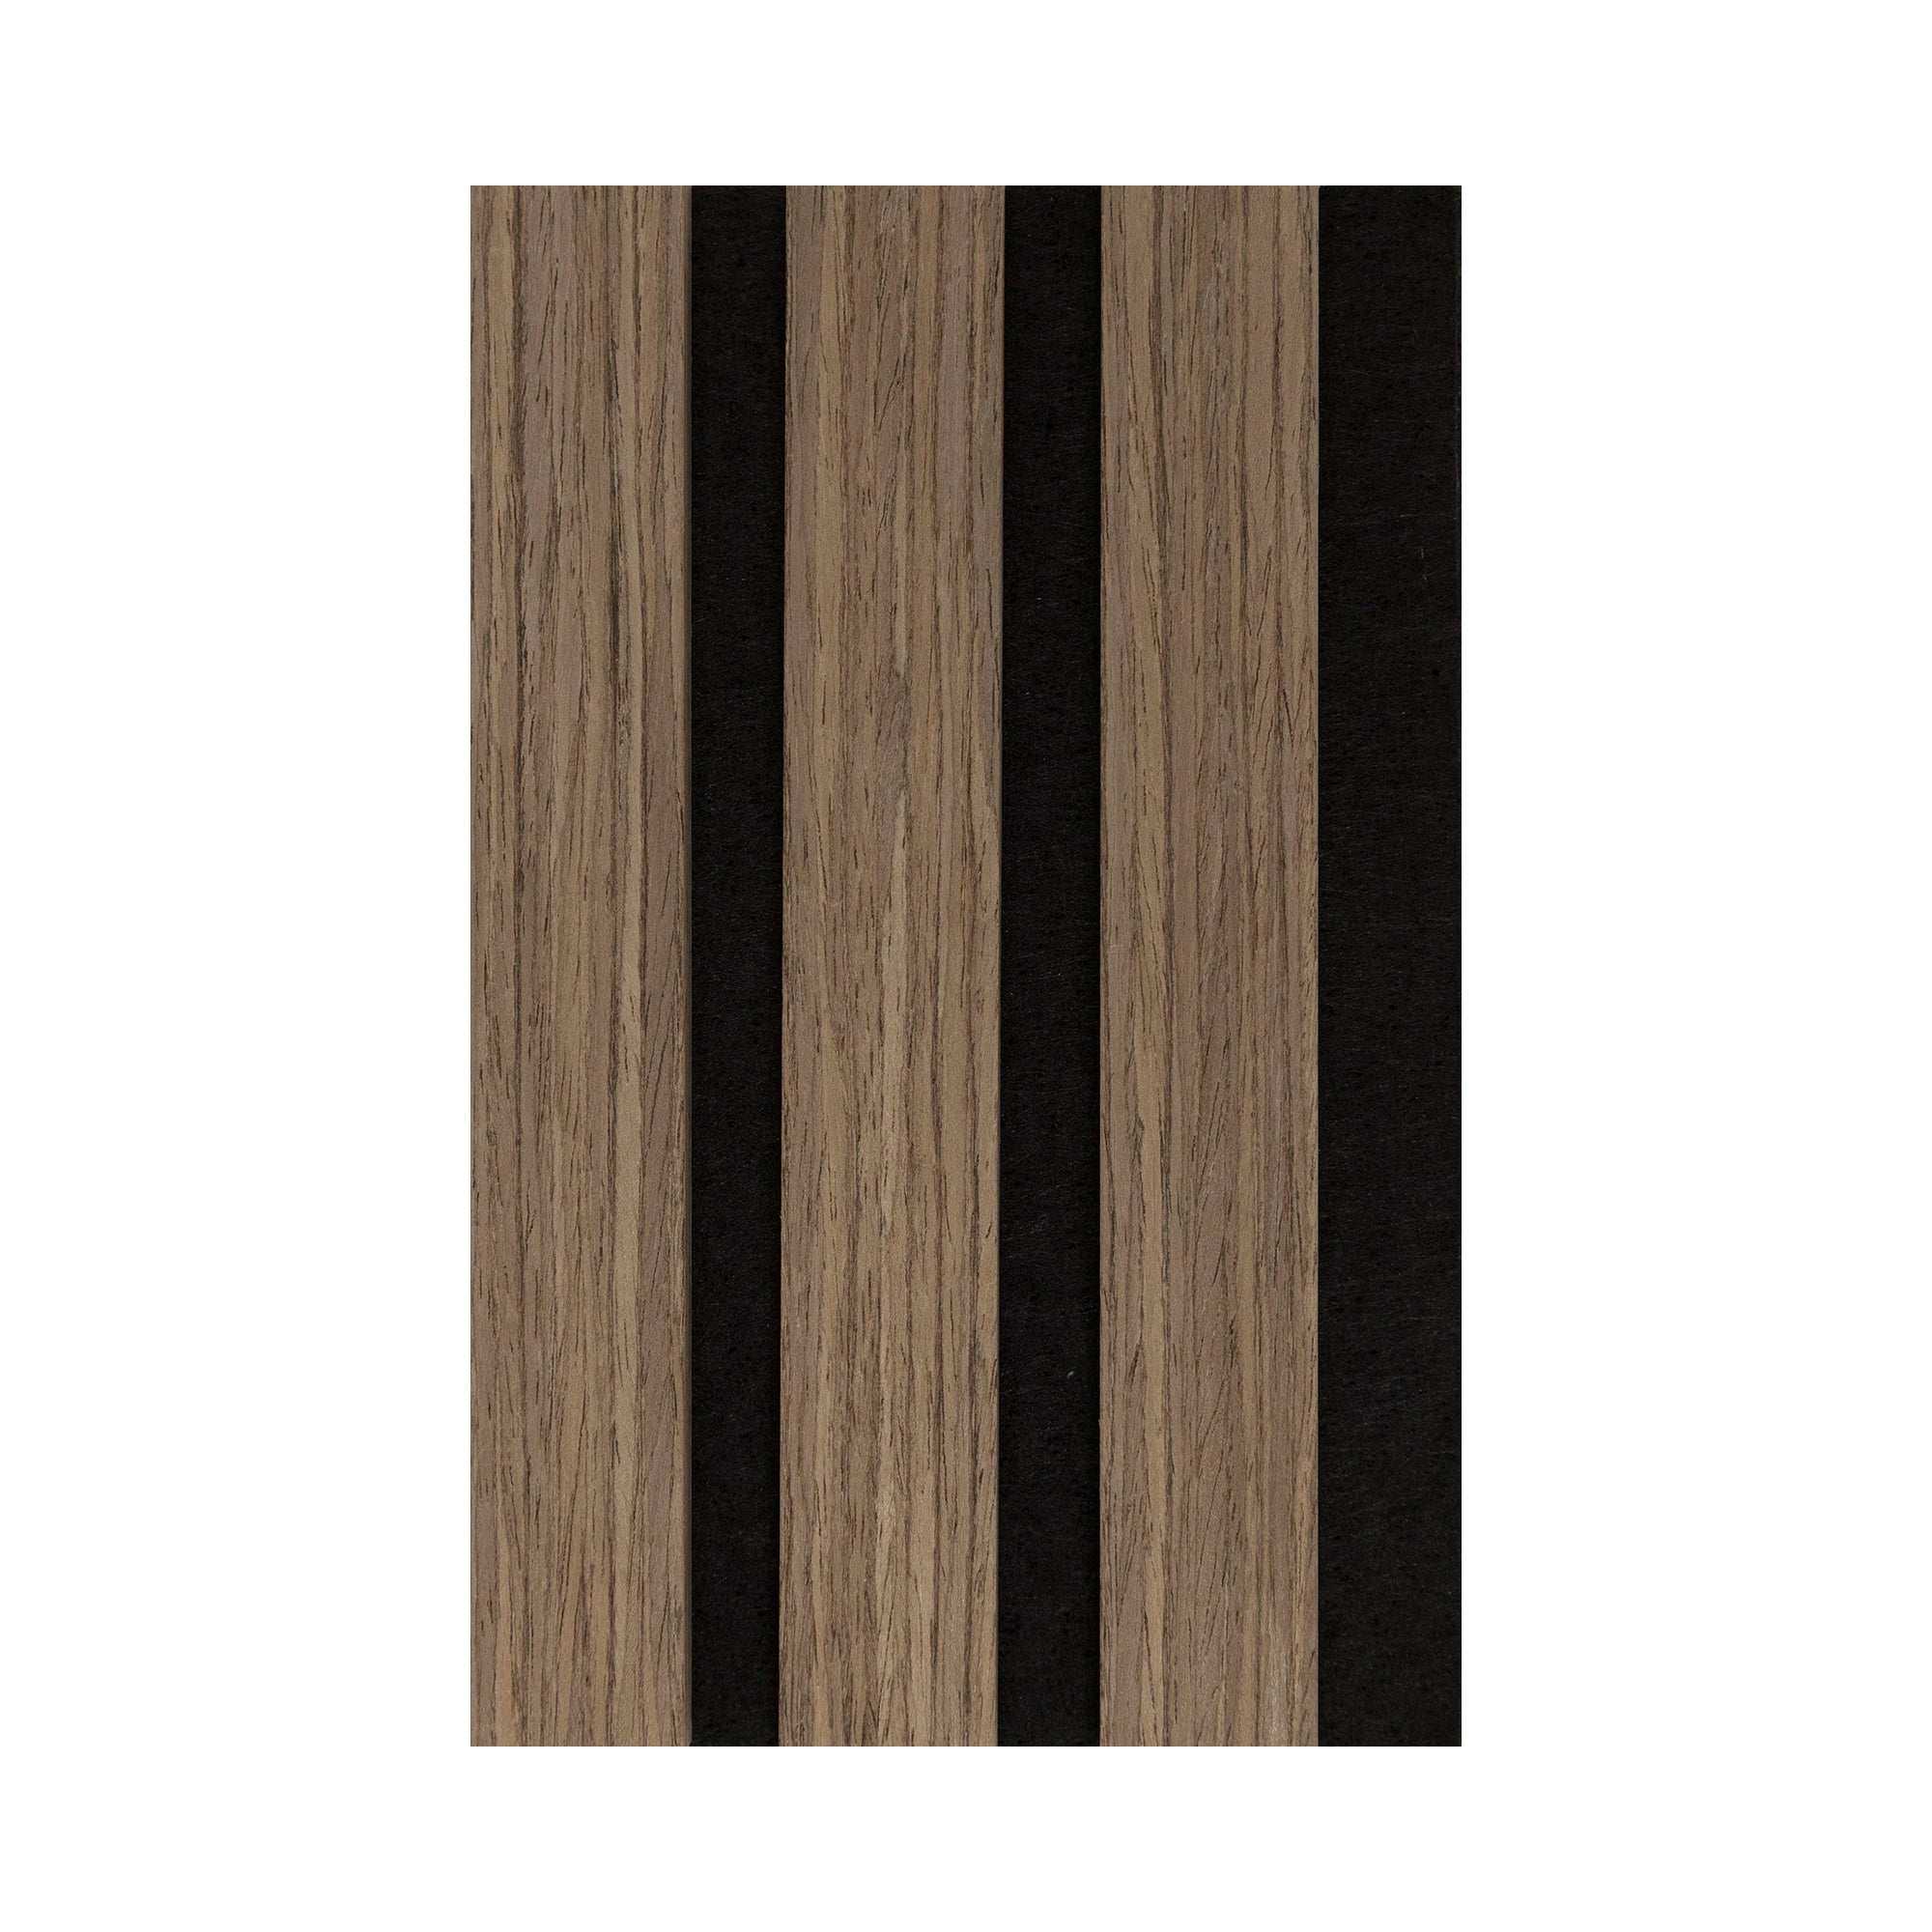 Sample Product 30x12.5x2.1 cm Bamboo Acoustic Wood Wall Panels